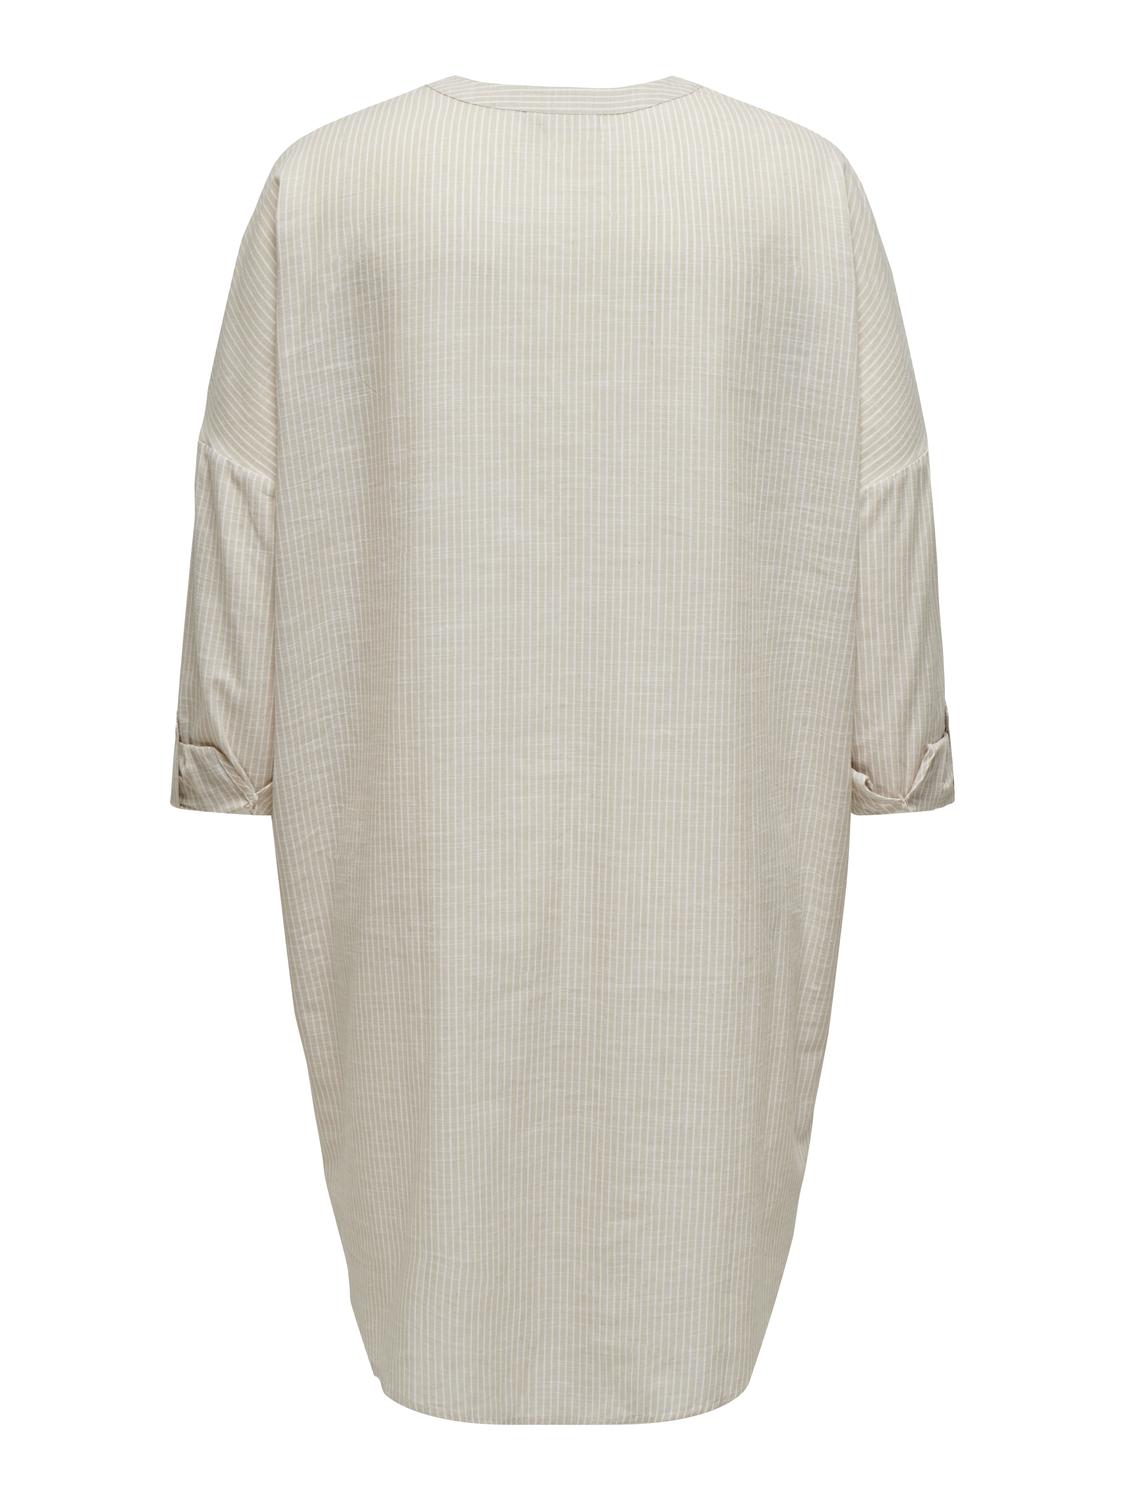 ONLY Curvy long shirt -Pure Cashmere - 15323256